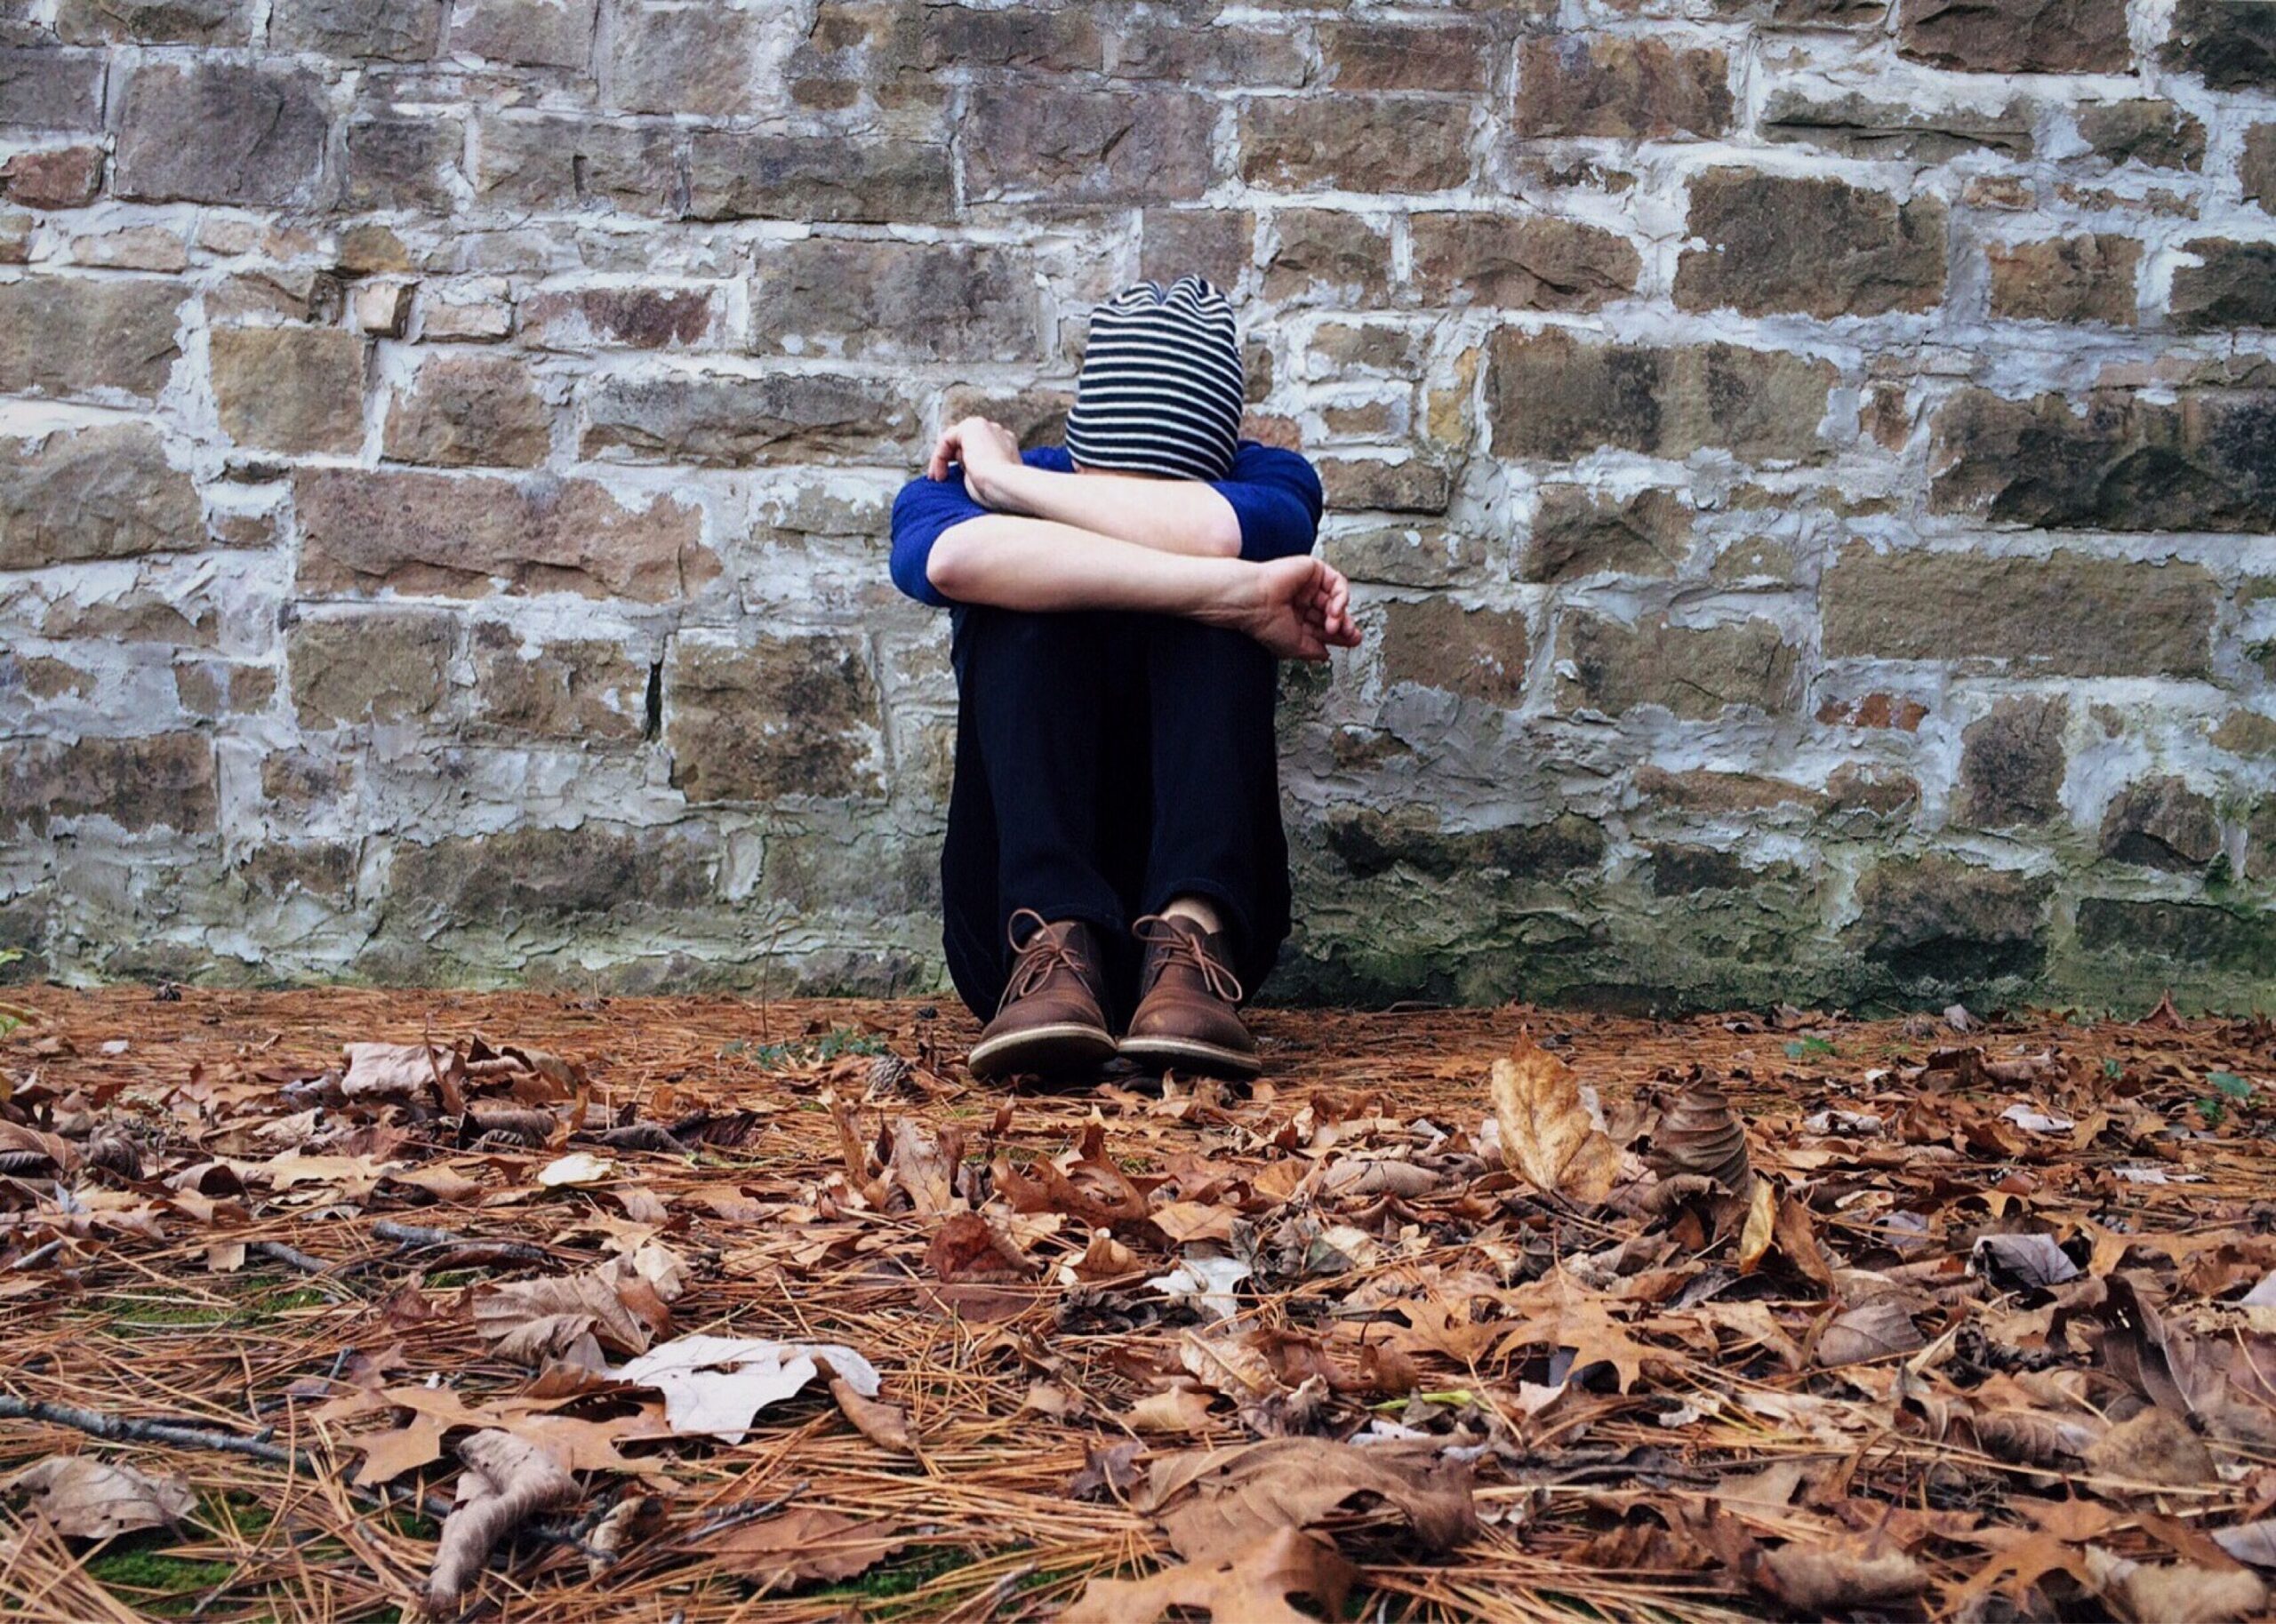 A person is sitting against a brick wall. Fallen leaves lie on the ground. The person has their head buried in their arms and their arms crossed.